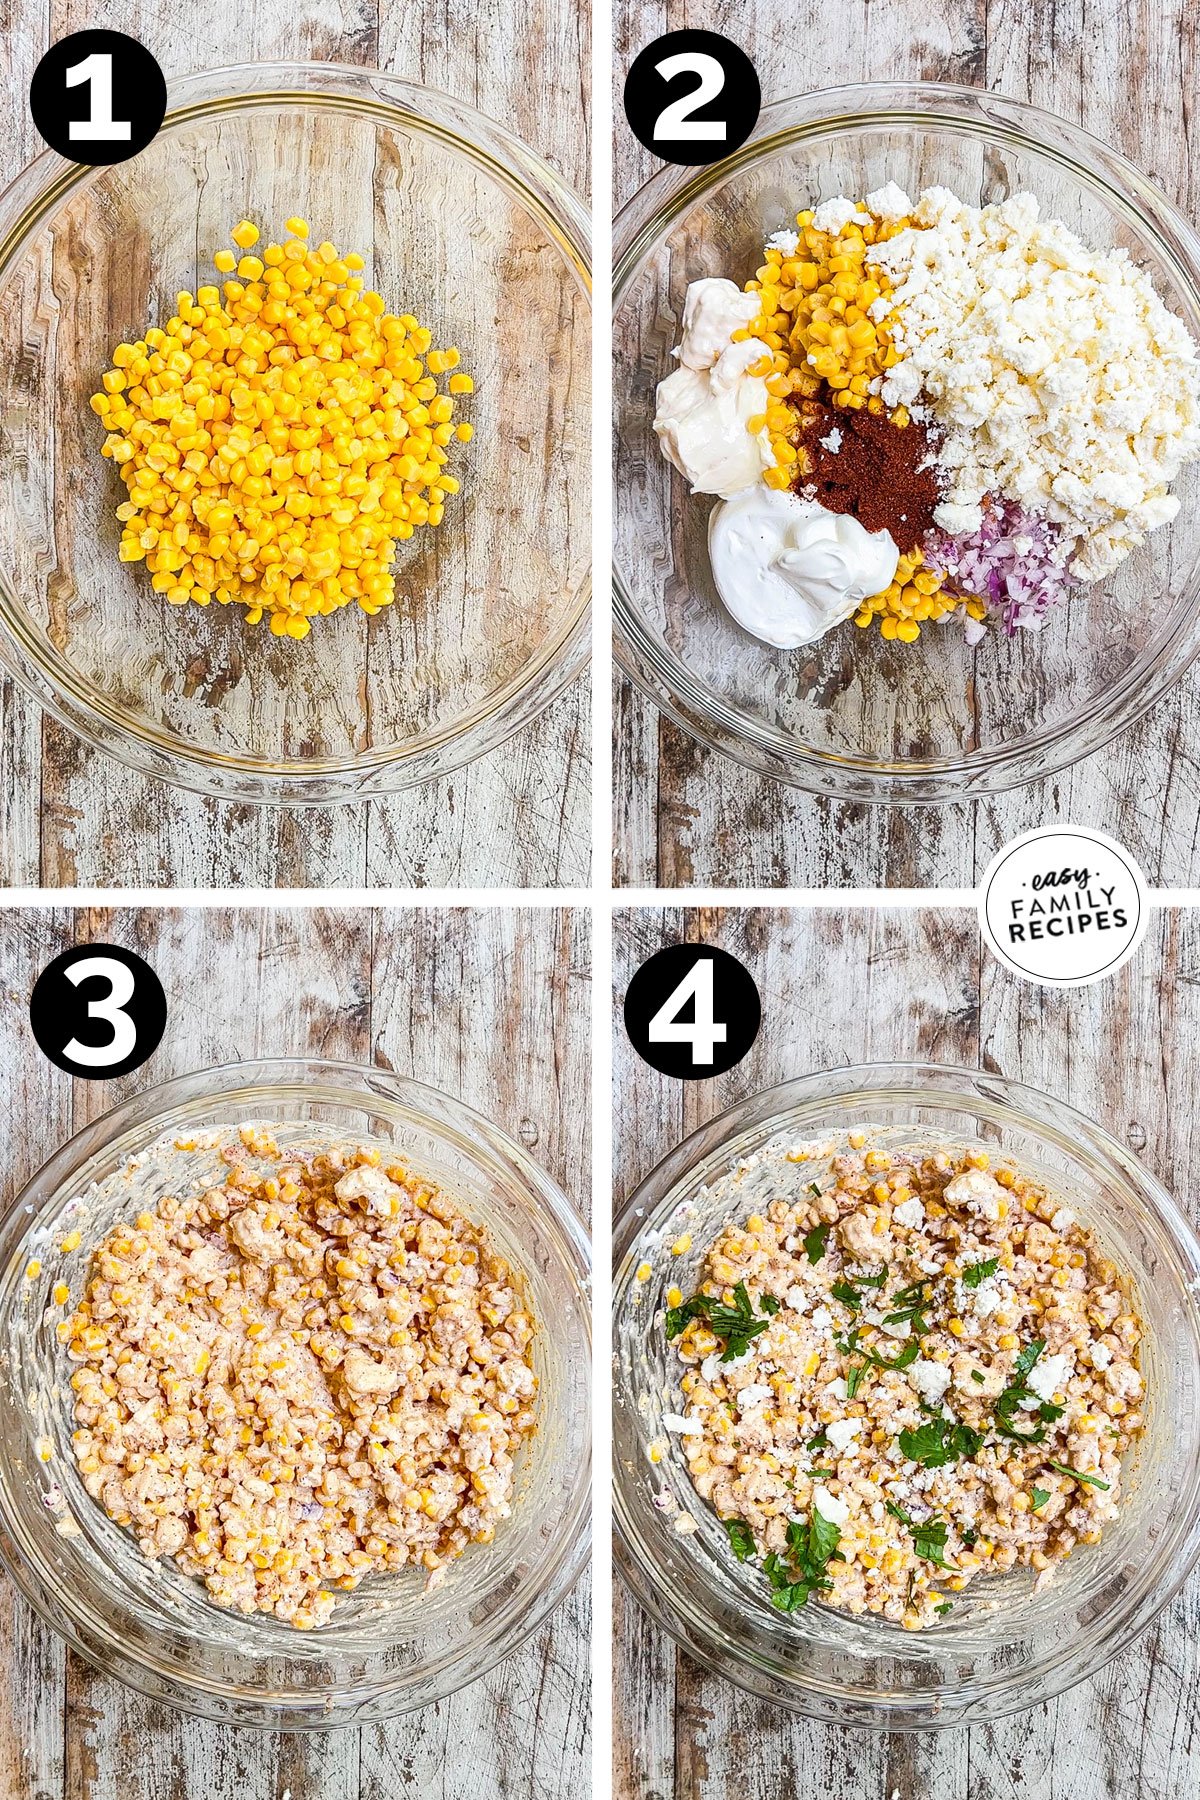 4 image collage making recipe in a bow: 1- corn added, 2-remaining ingredients added on top of corn, 3- after tossing together, 4- queso fresca and cilantro added on top.